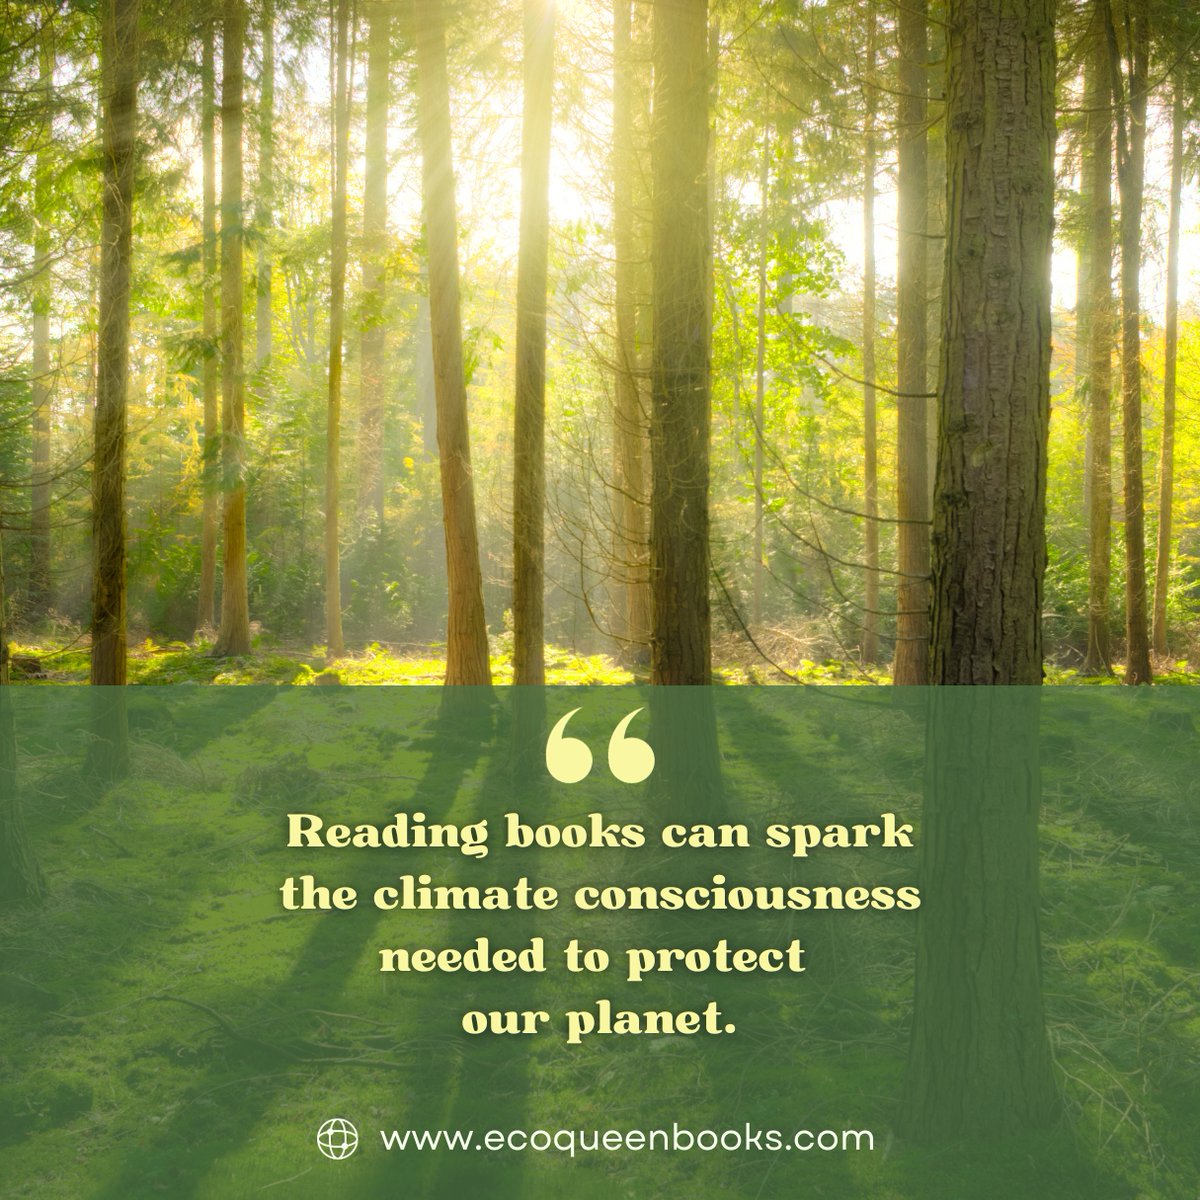 Dive into the world of books while keeping our planet in mind. 💚

#SustainableReading #EcoFriendlyBooks #GreenLiving #EcoConsciousMinds #PageTurnerPlanetSaver #EcoReaders